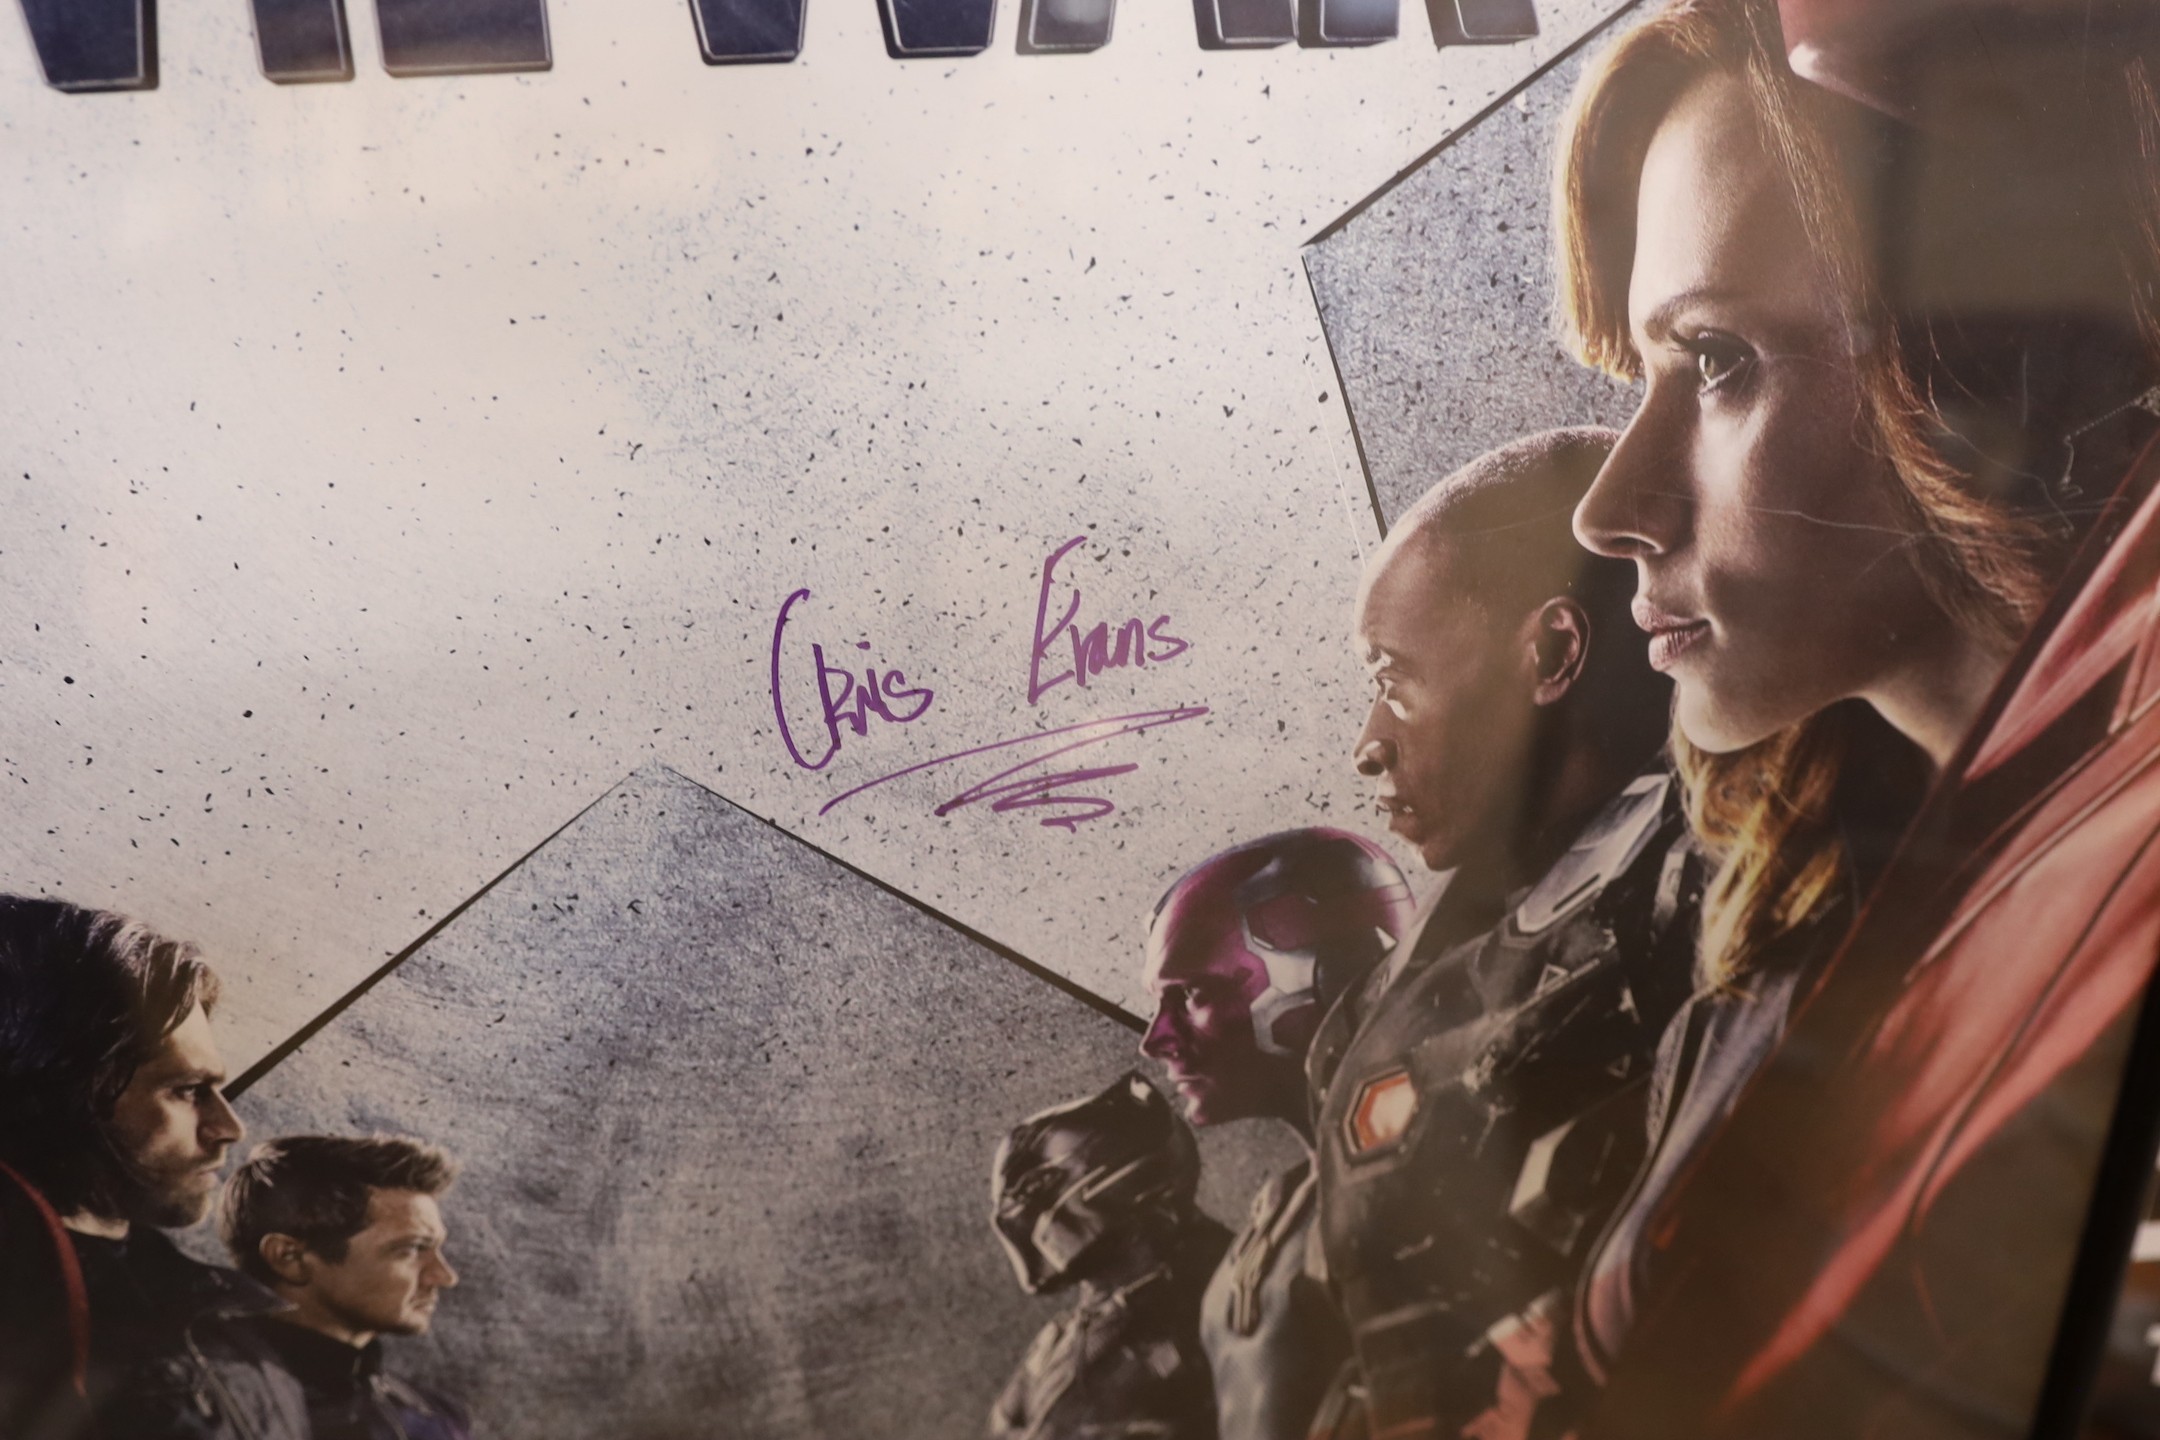 Five framed cinema posters, Captain America Civil War signed by Chris Evans, who played Captain America, from Eastbourne Odeon